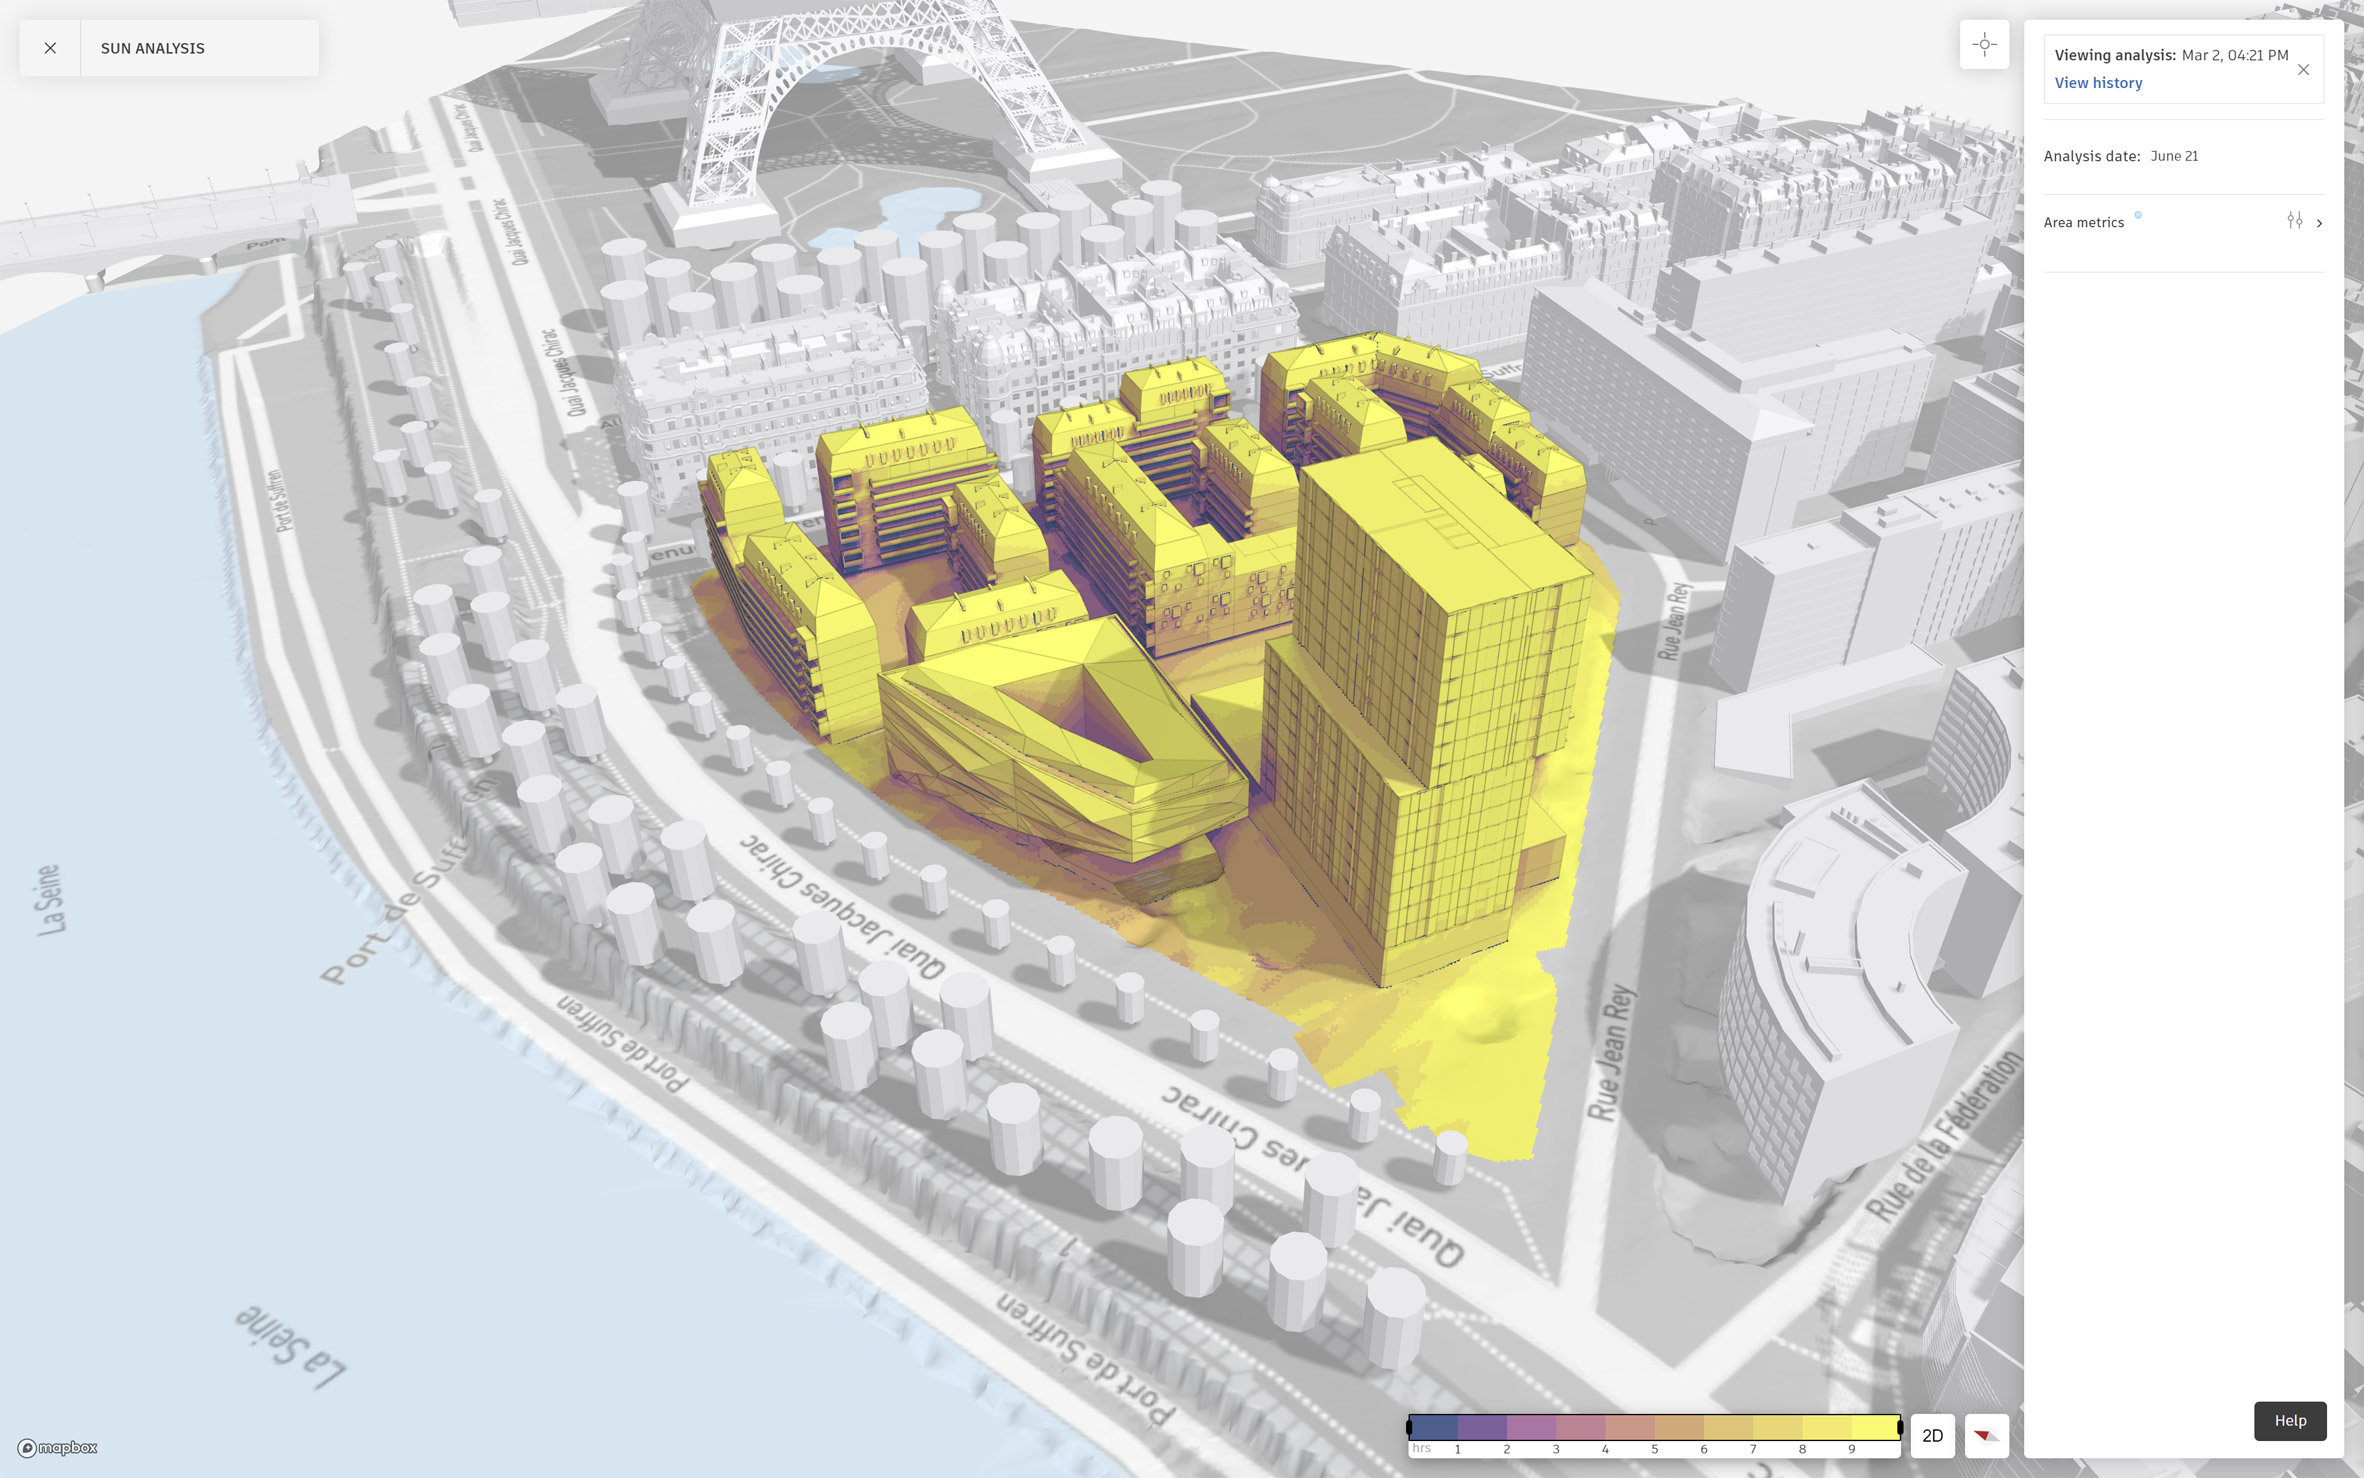 Screenshot of Autodesk's Forma software showing an analysis of a building with area metrics